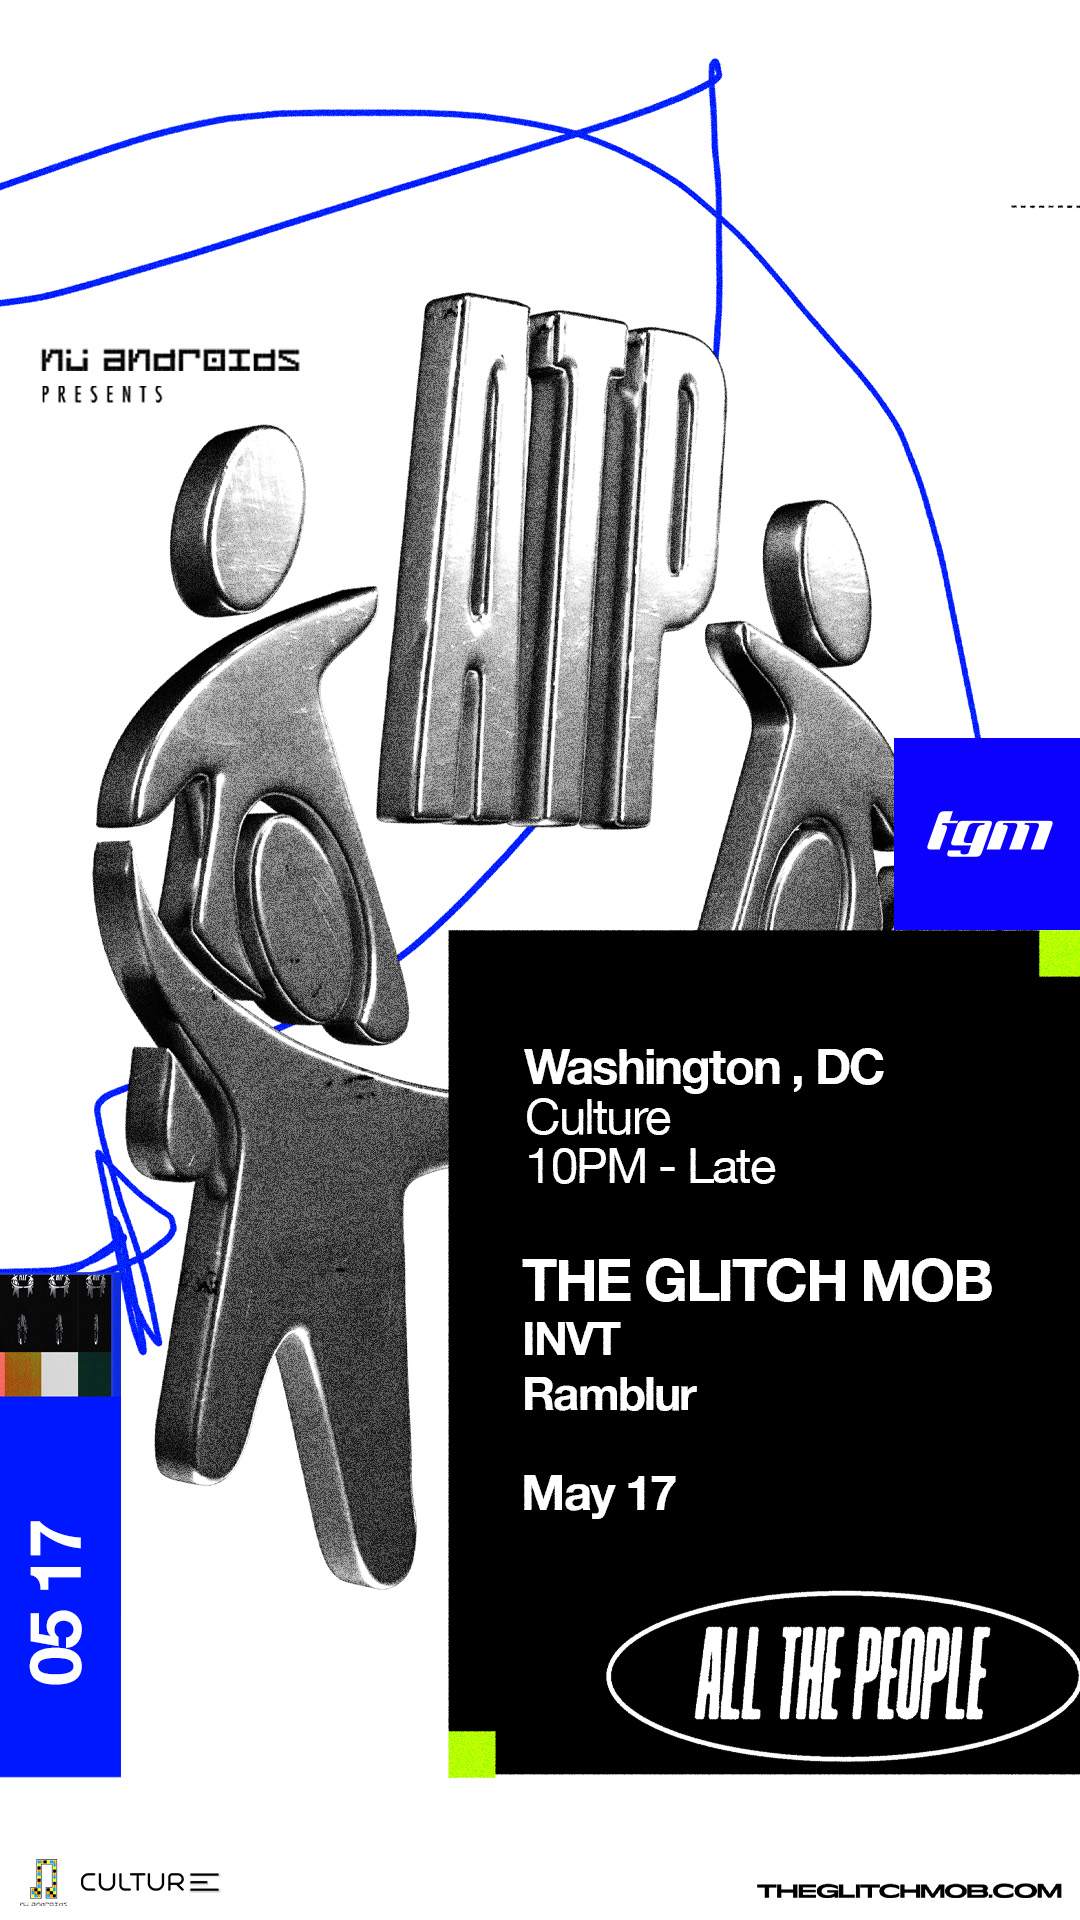 Nü Androids + All The People present: The Glitch Mob - フライヤー表